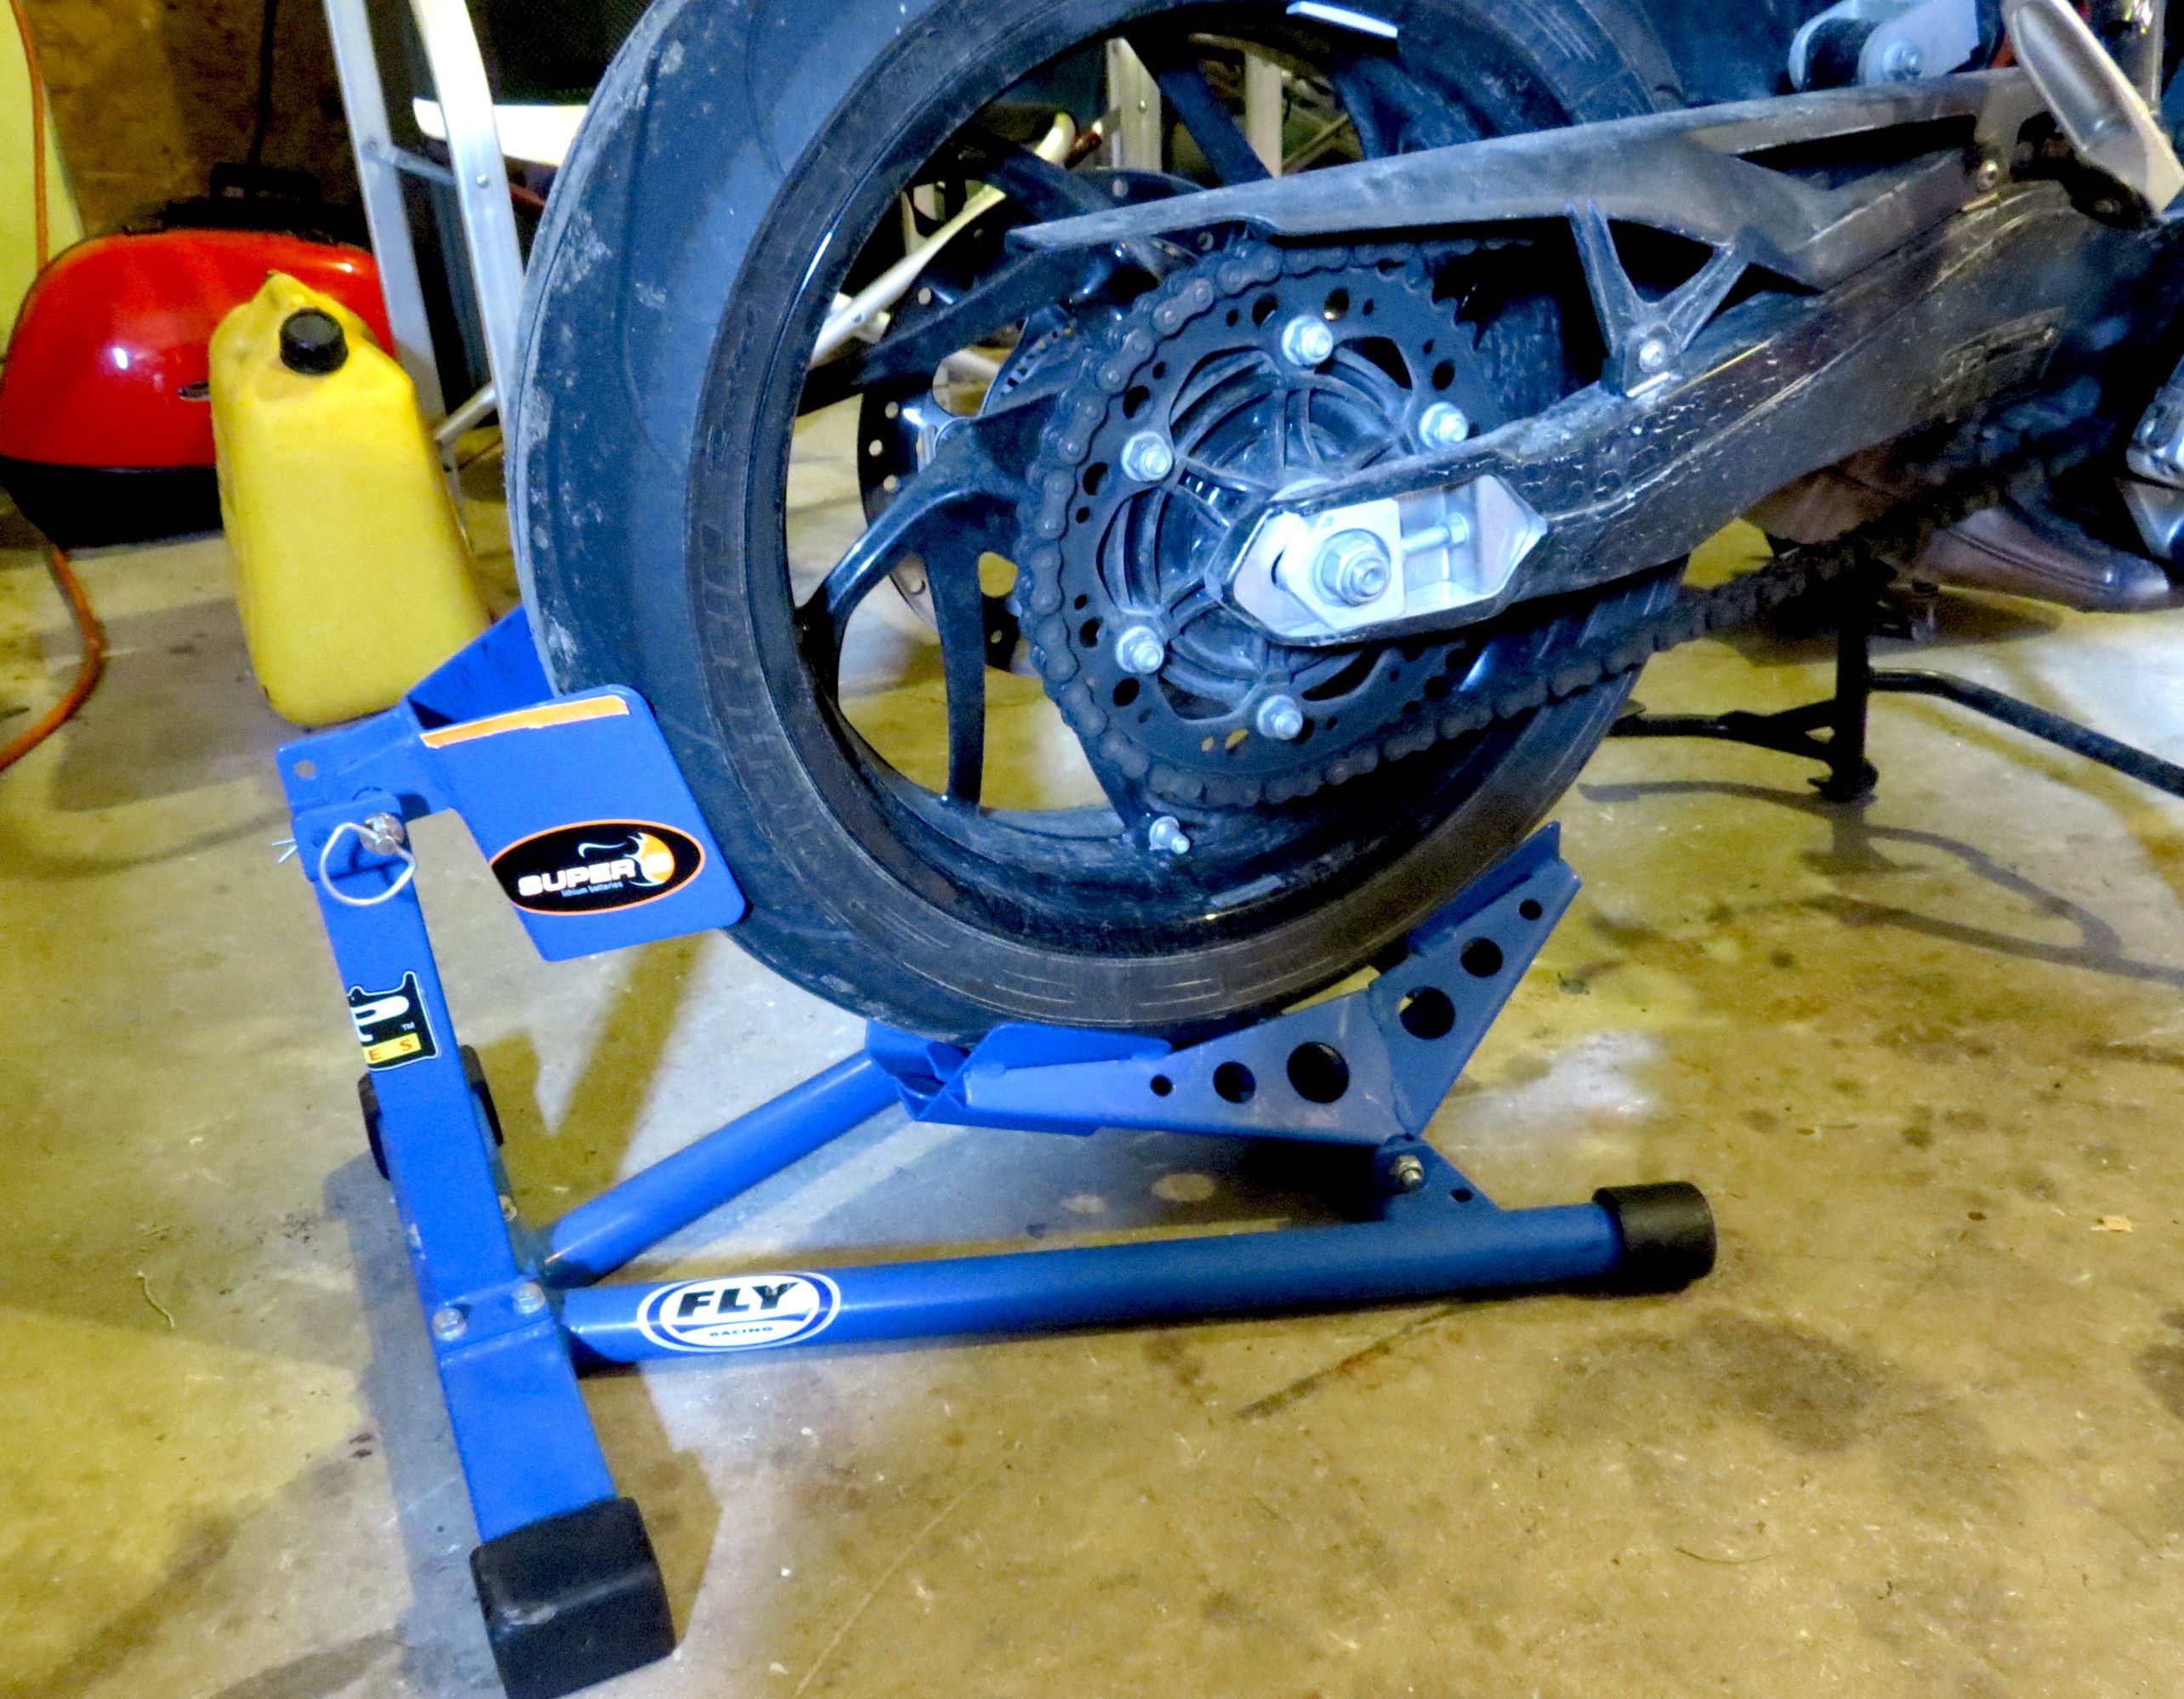 Secure the rear wheel, we used a front wheel chock sold at most bike shops and Princess Auto